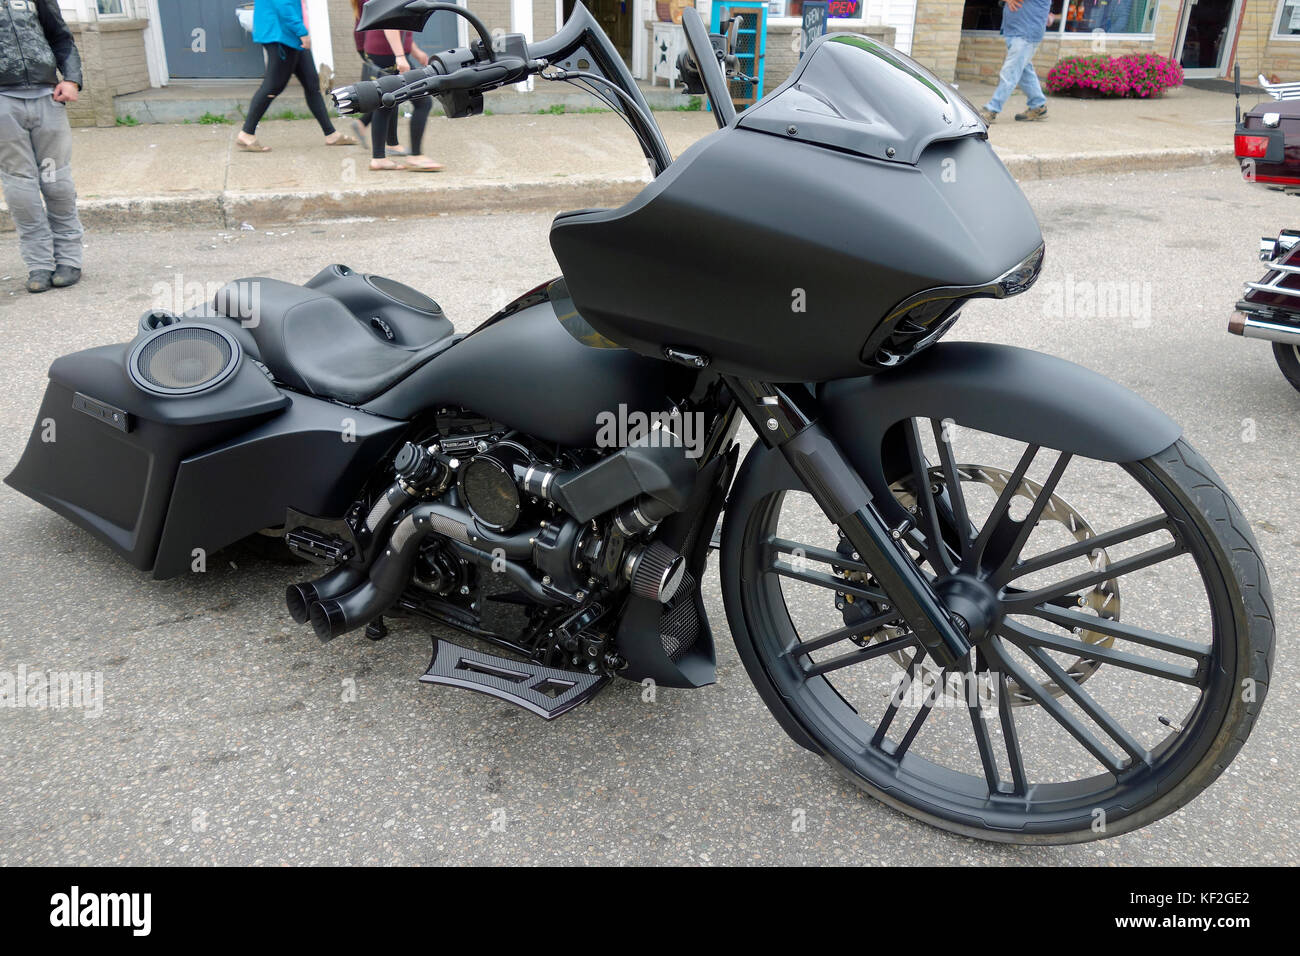 A custom made motorcycle shown at the wharf rat rally in Digby, Nova Scotia Stock Photo